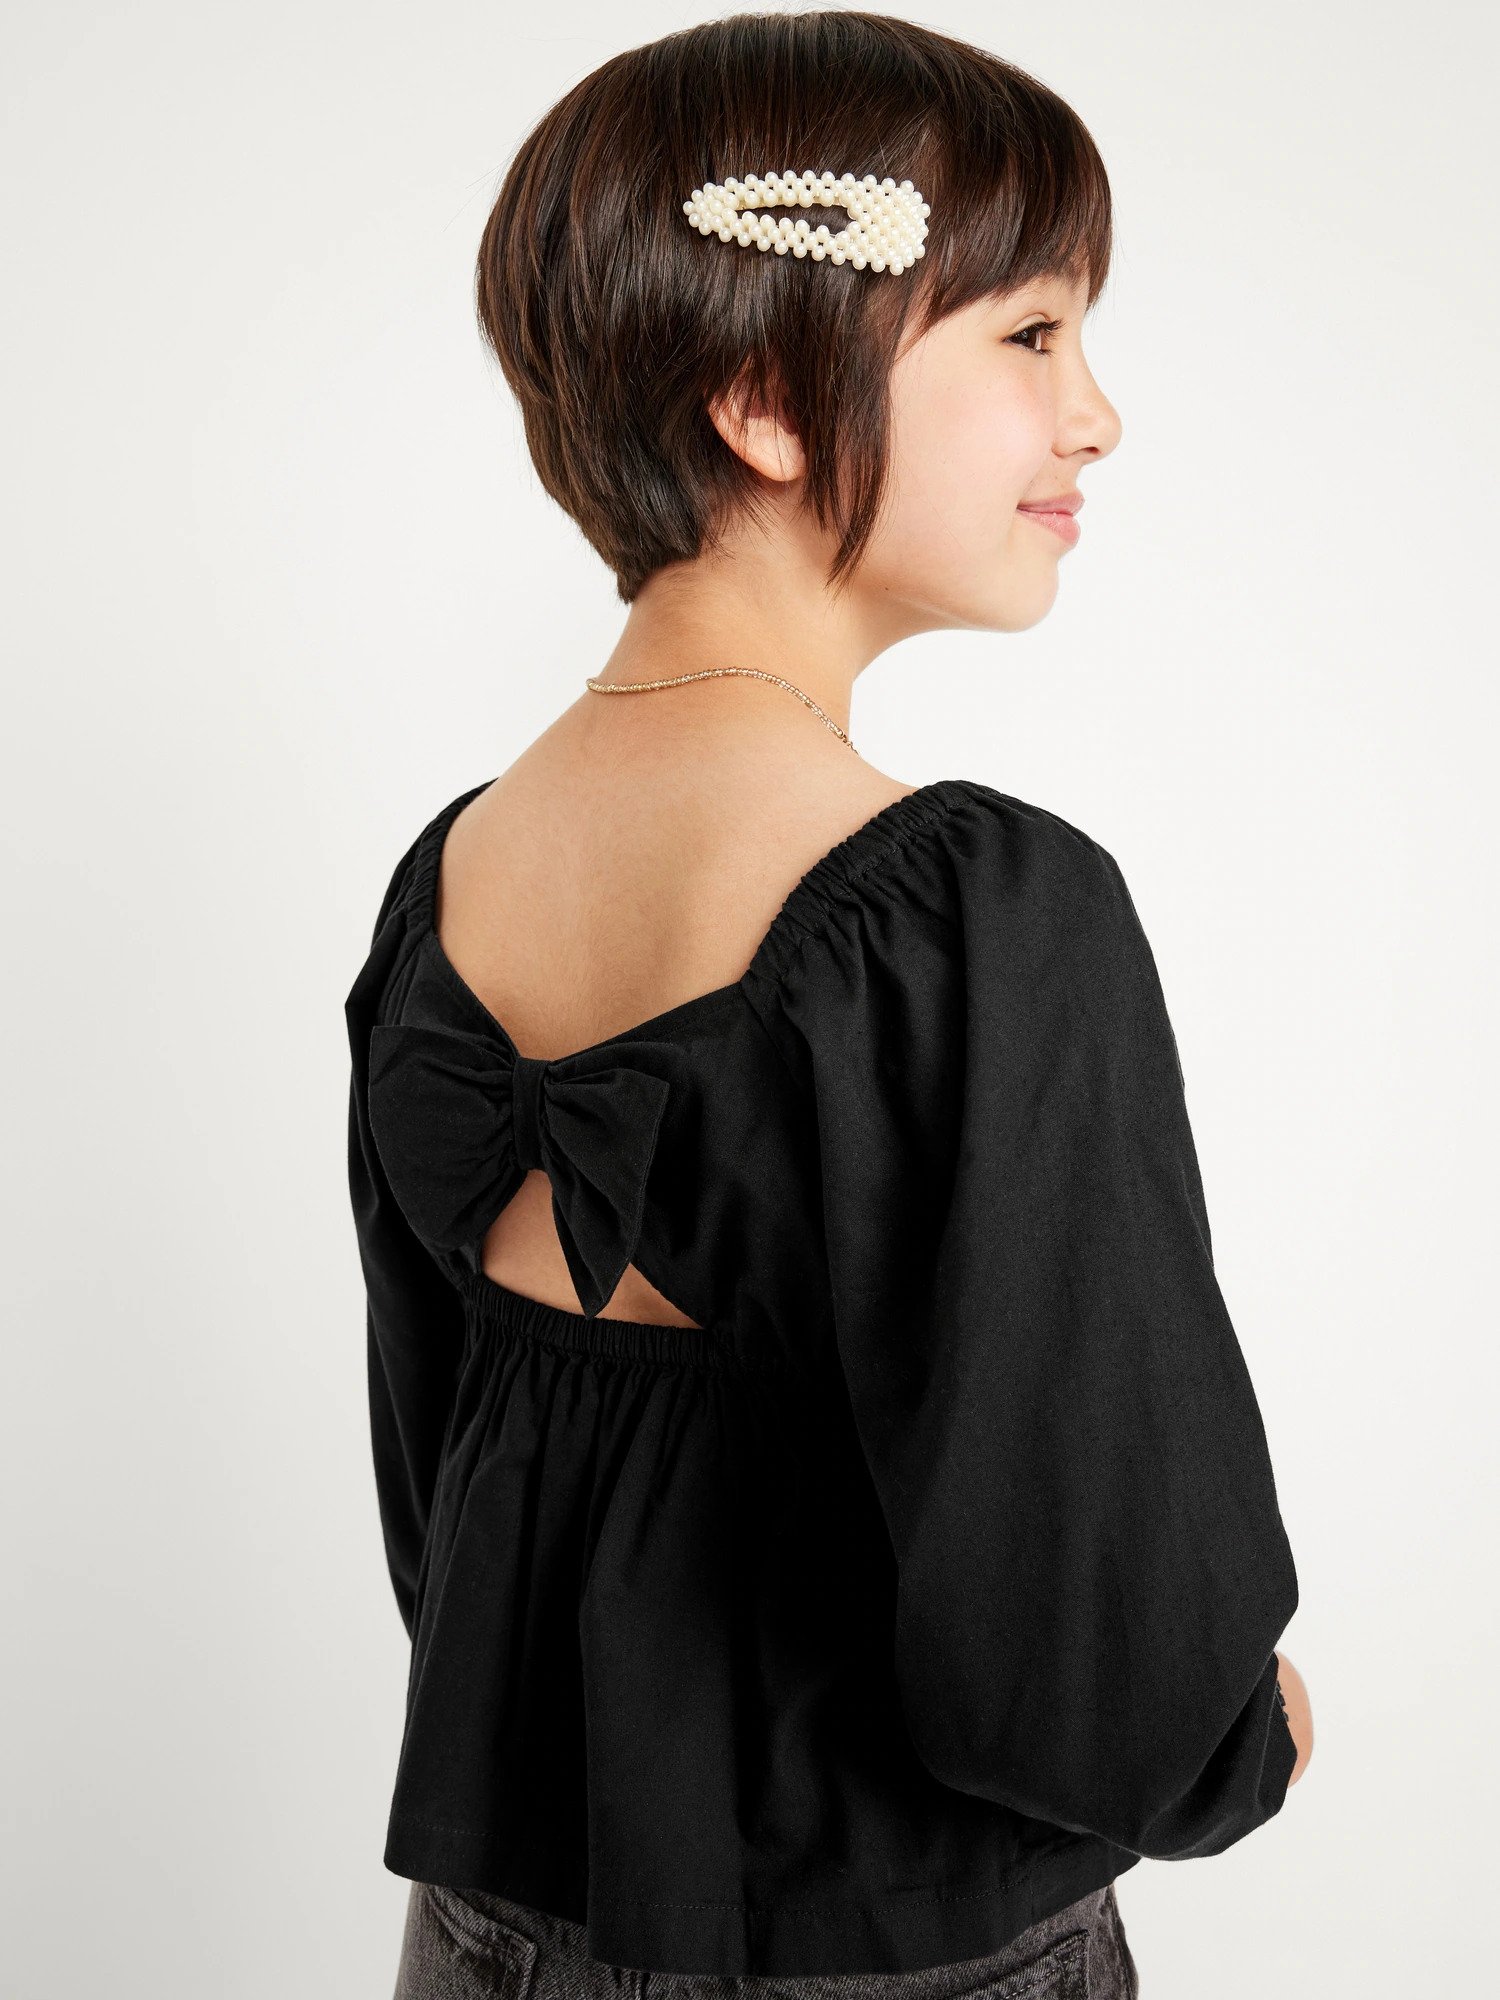    Long-Sleeve Back-Bow Top for Girls, P1,650   